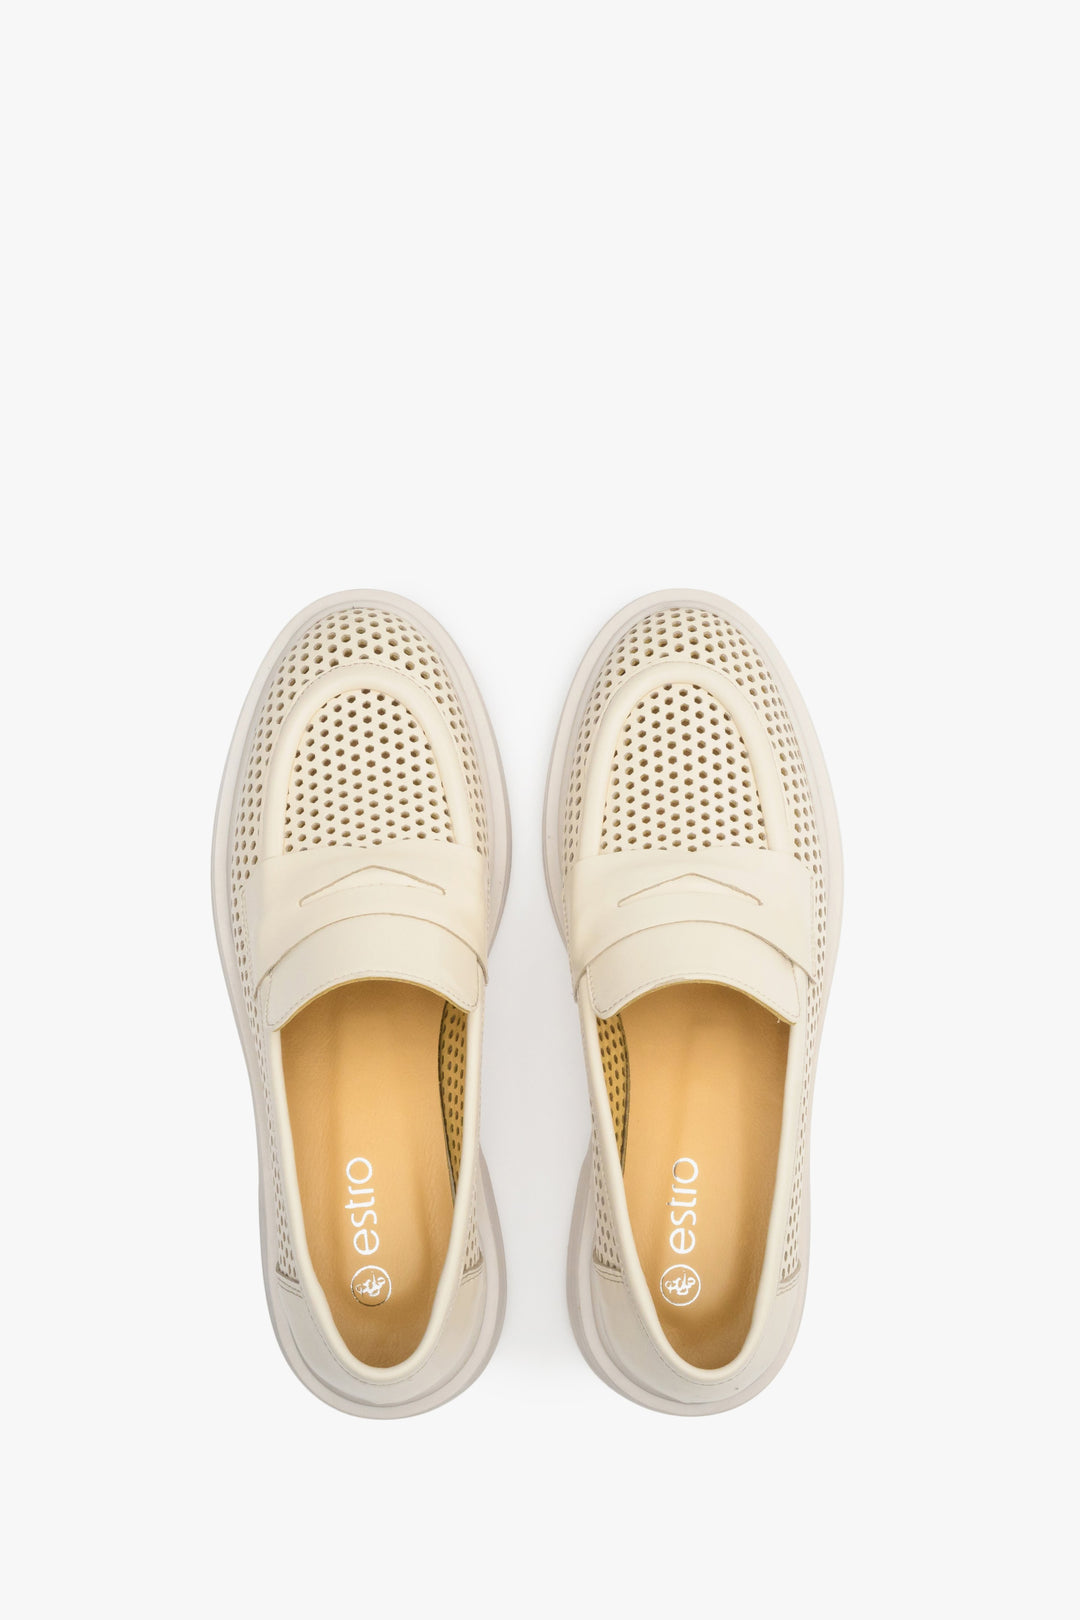 Comfortable women's light beige Estro fall loafers - top view of the footwear.